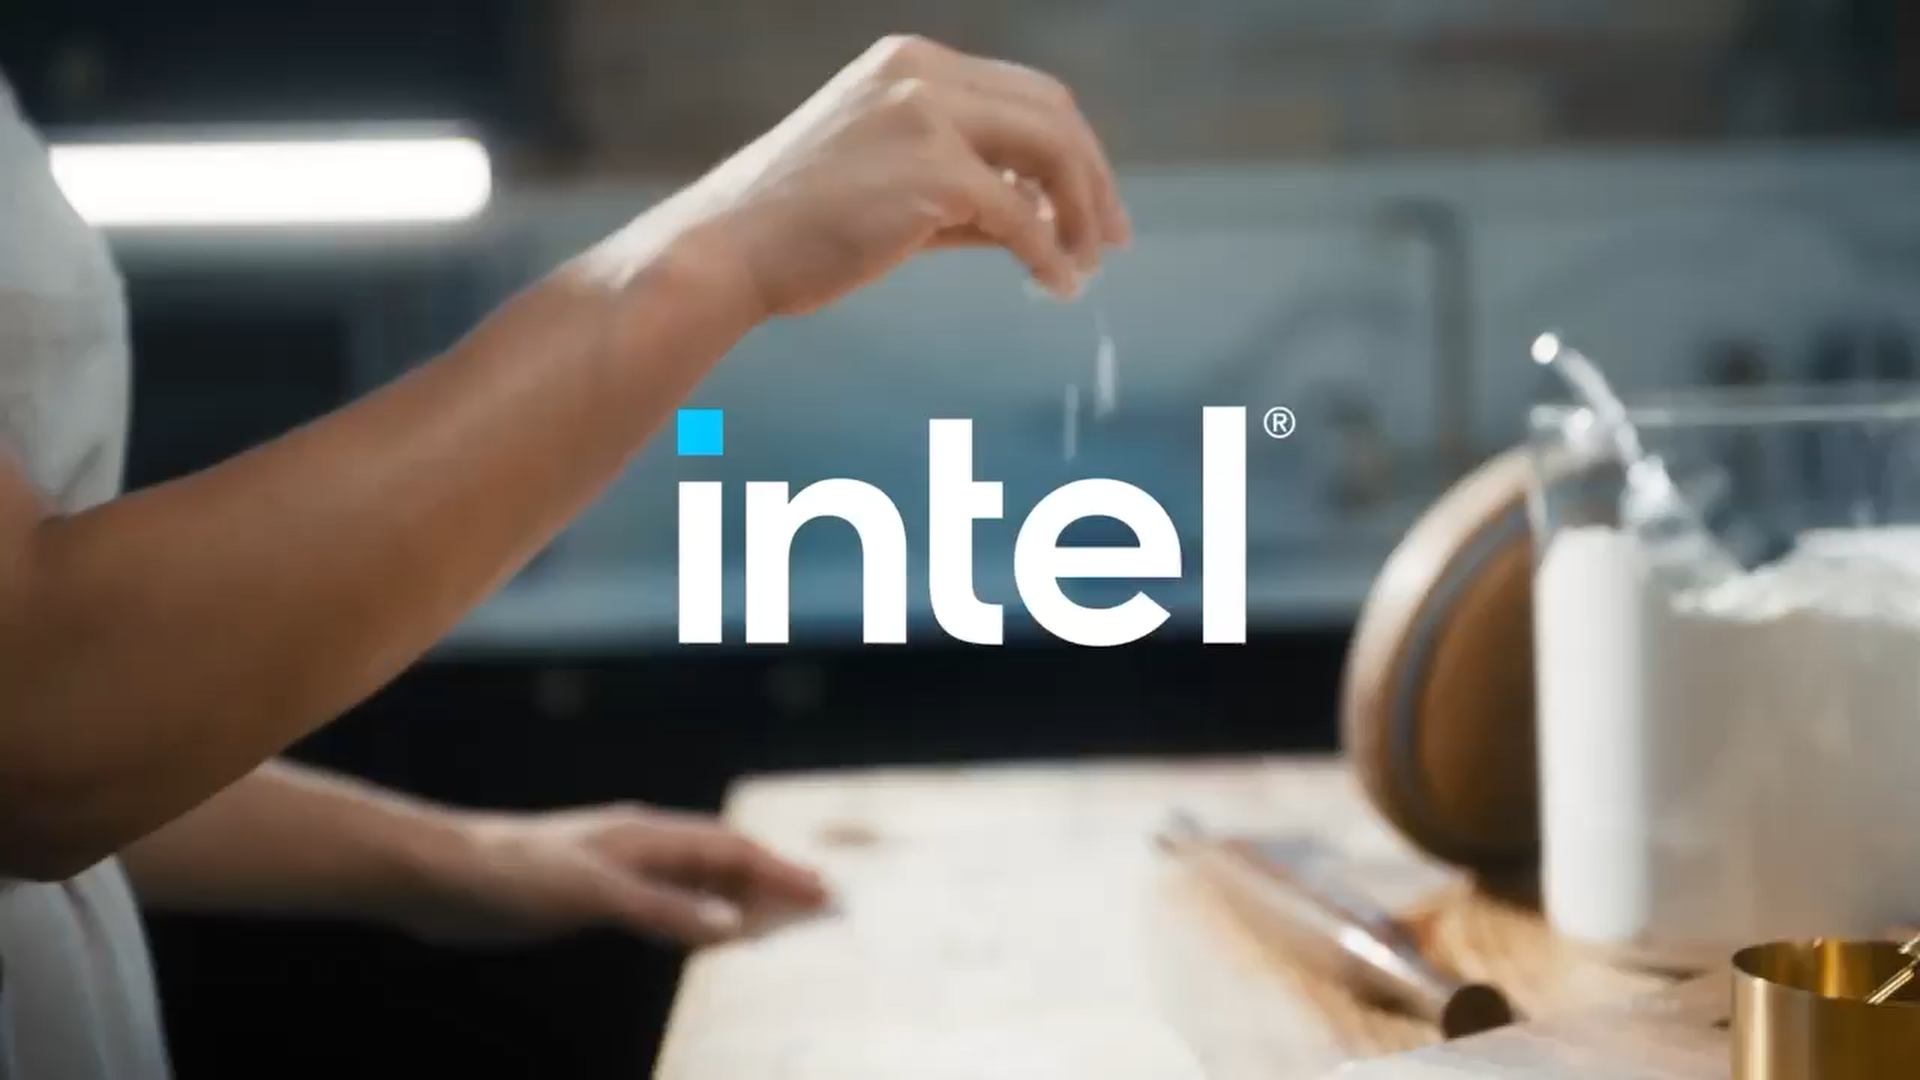 Featured image for “INTEL”